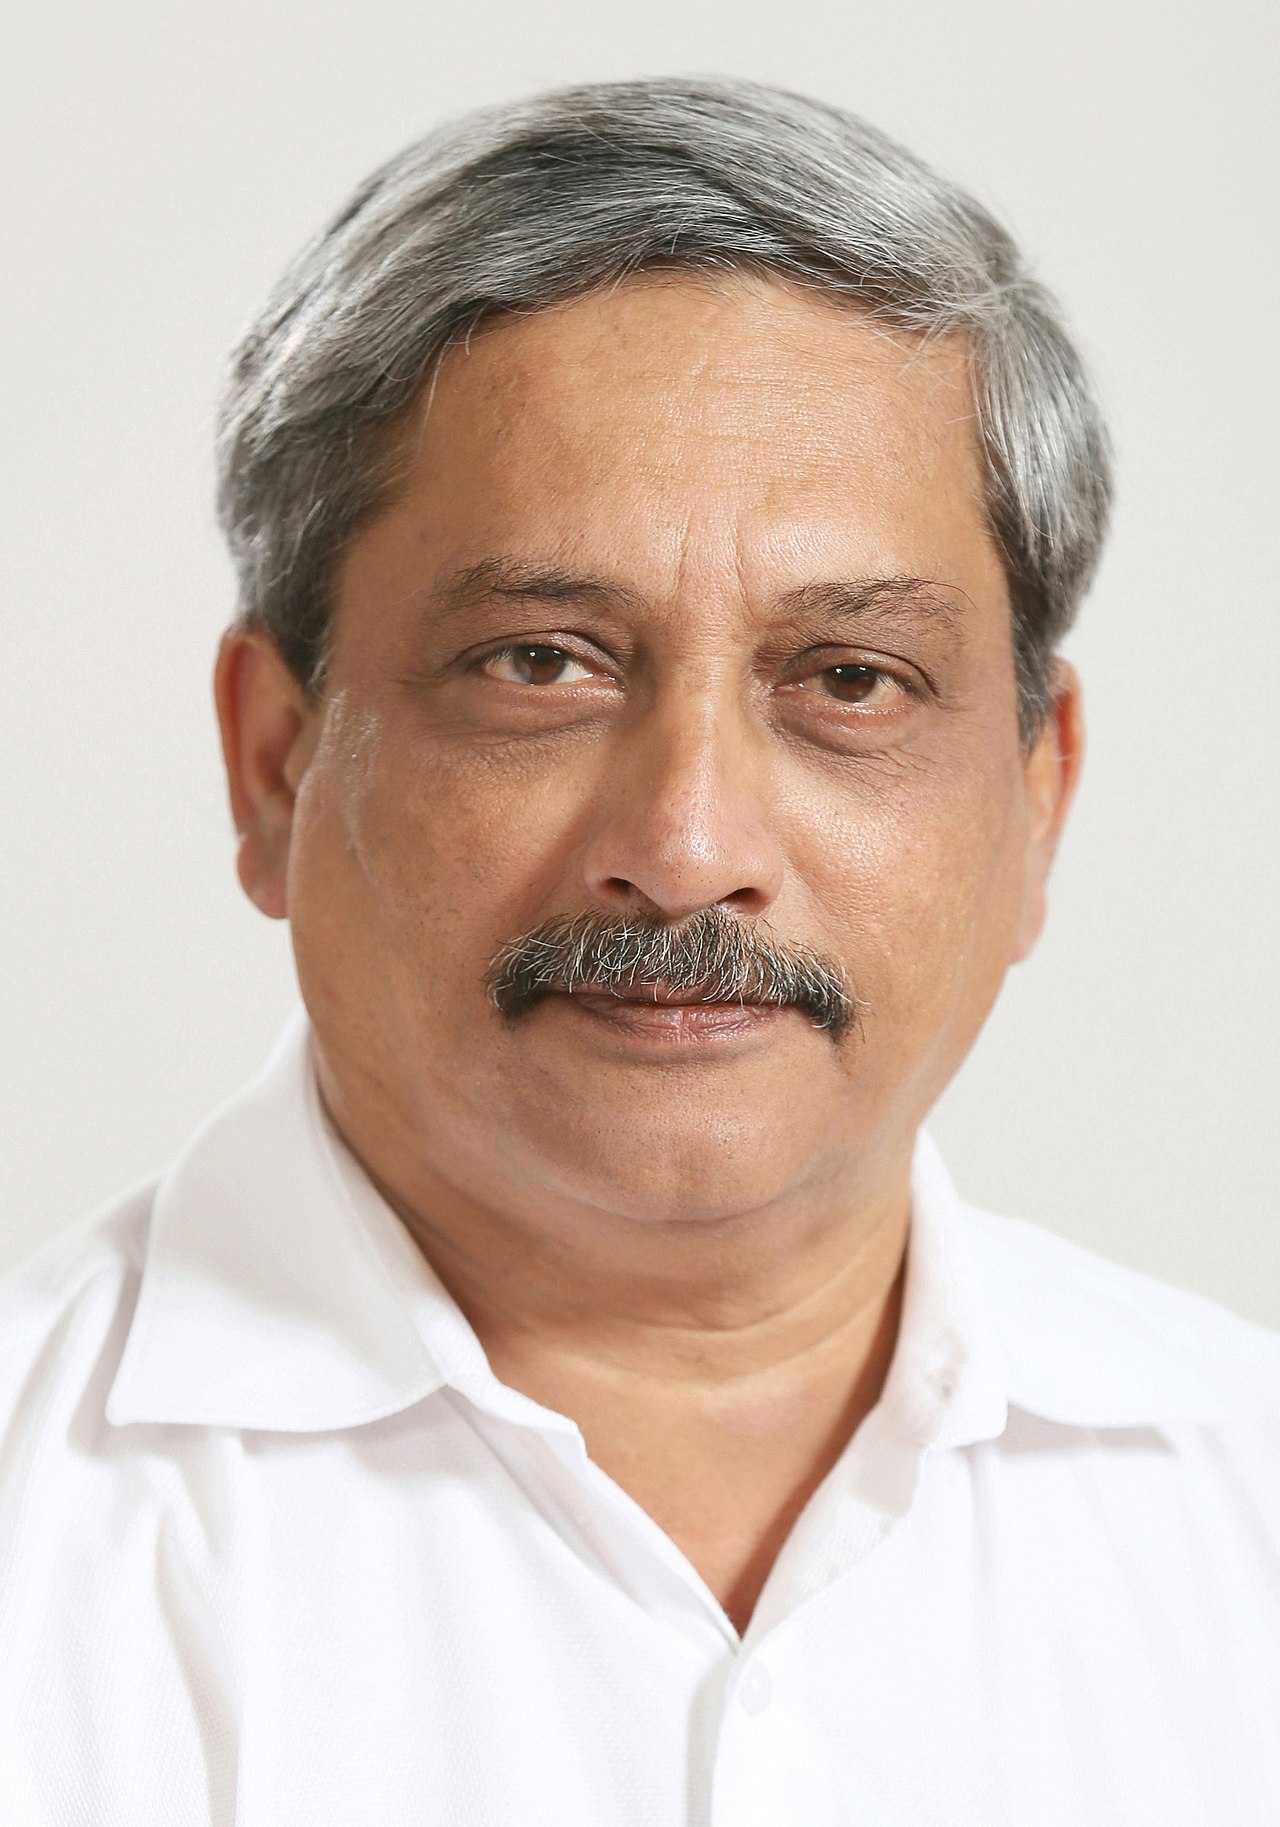 1280px-The_official_photograph_of_the_Union_Minister_for_Defence,_Shri_Manohar_Parrikar.jpg